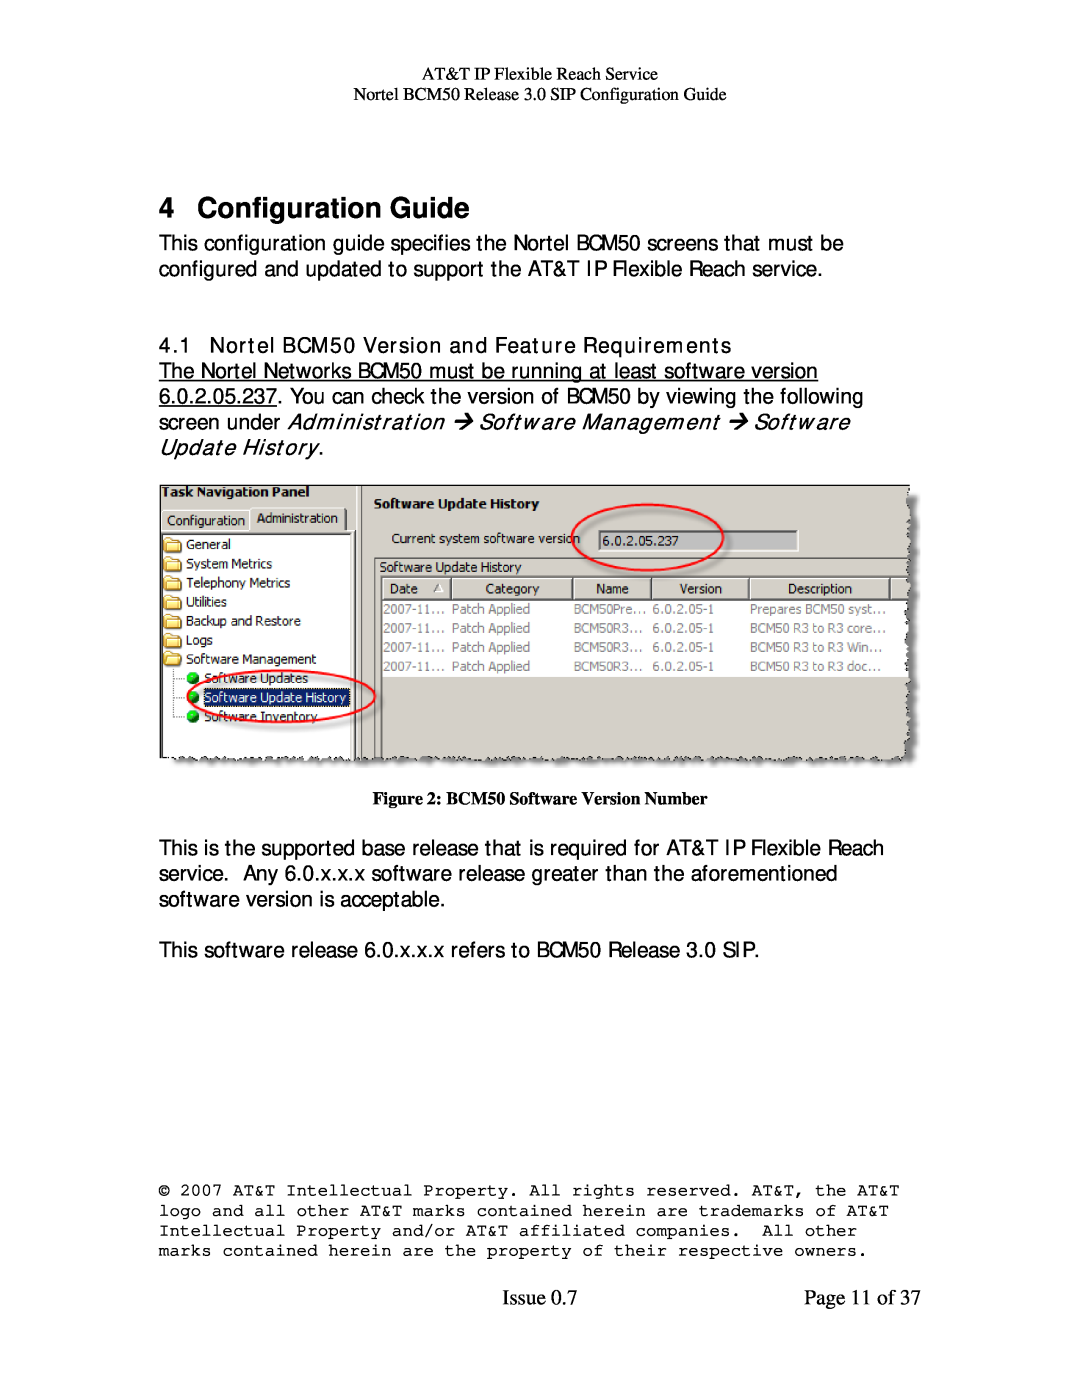 AT&T manual Configuration Guide, Nortel BCM50 Version and Feature Requirements, Update History 